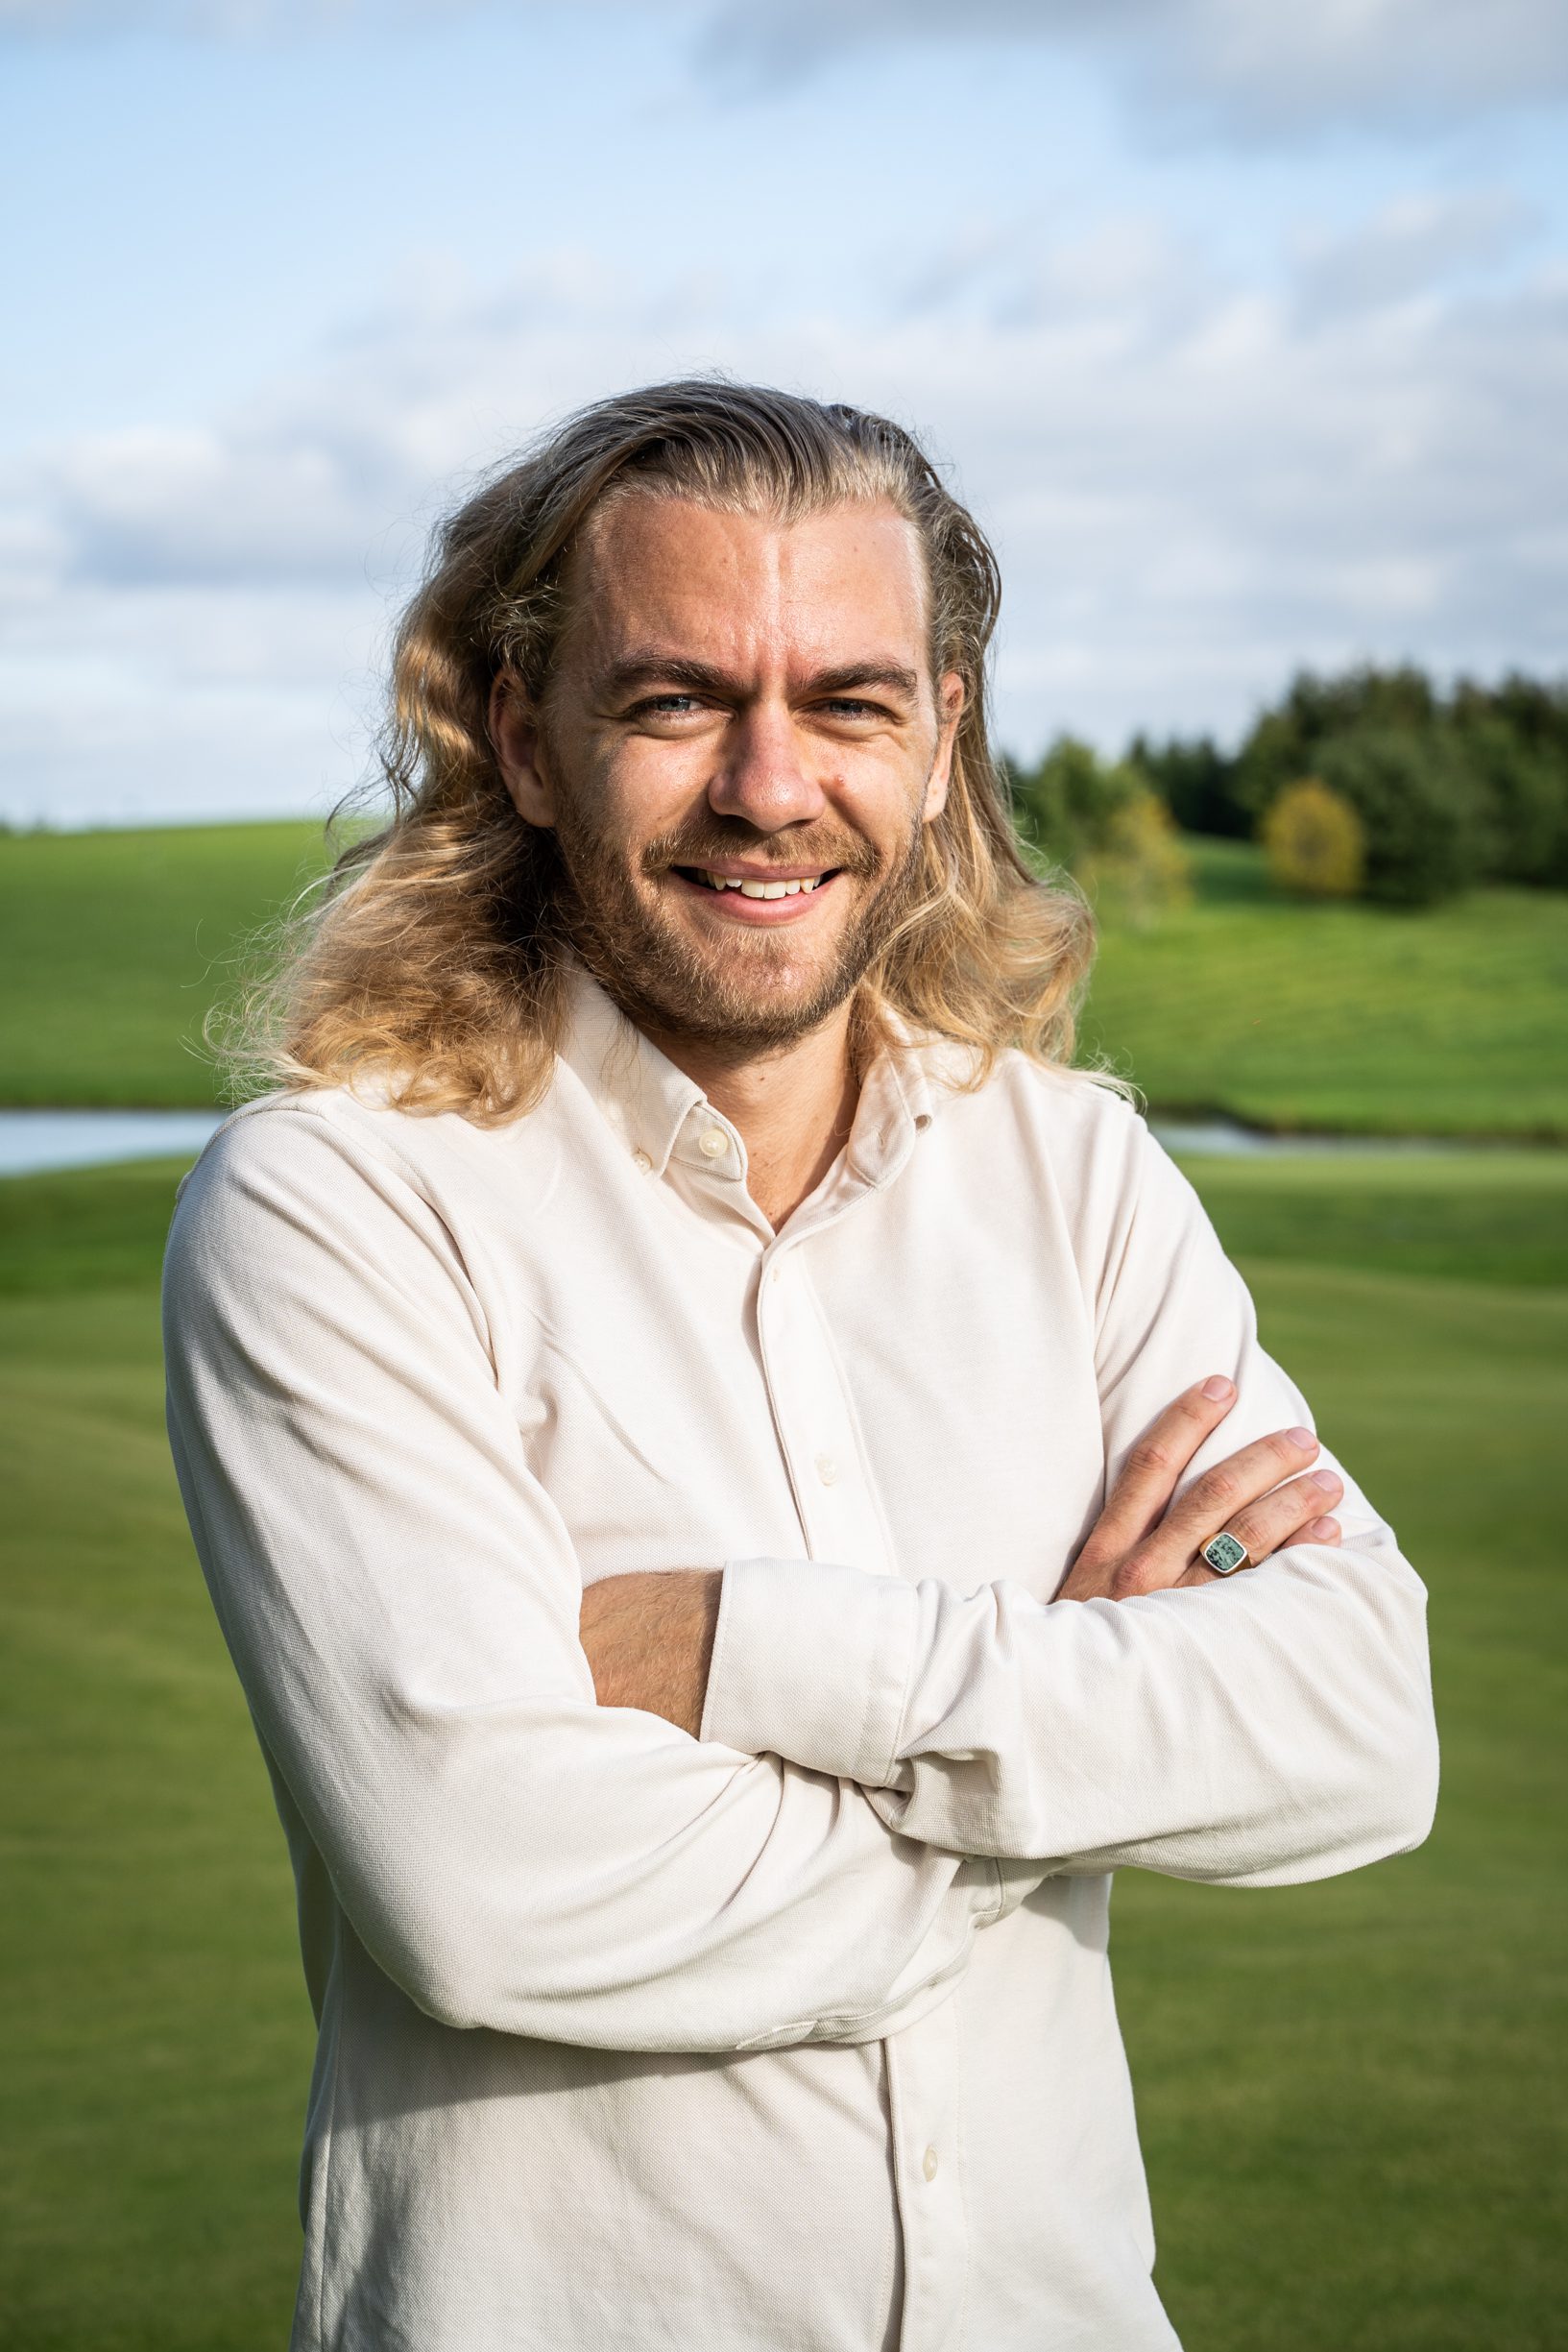 Golf’s Customer Service Management Specialists expand operations as 59club Nordic launches